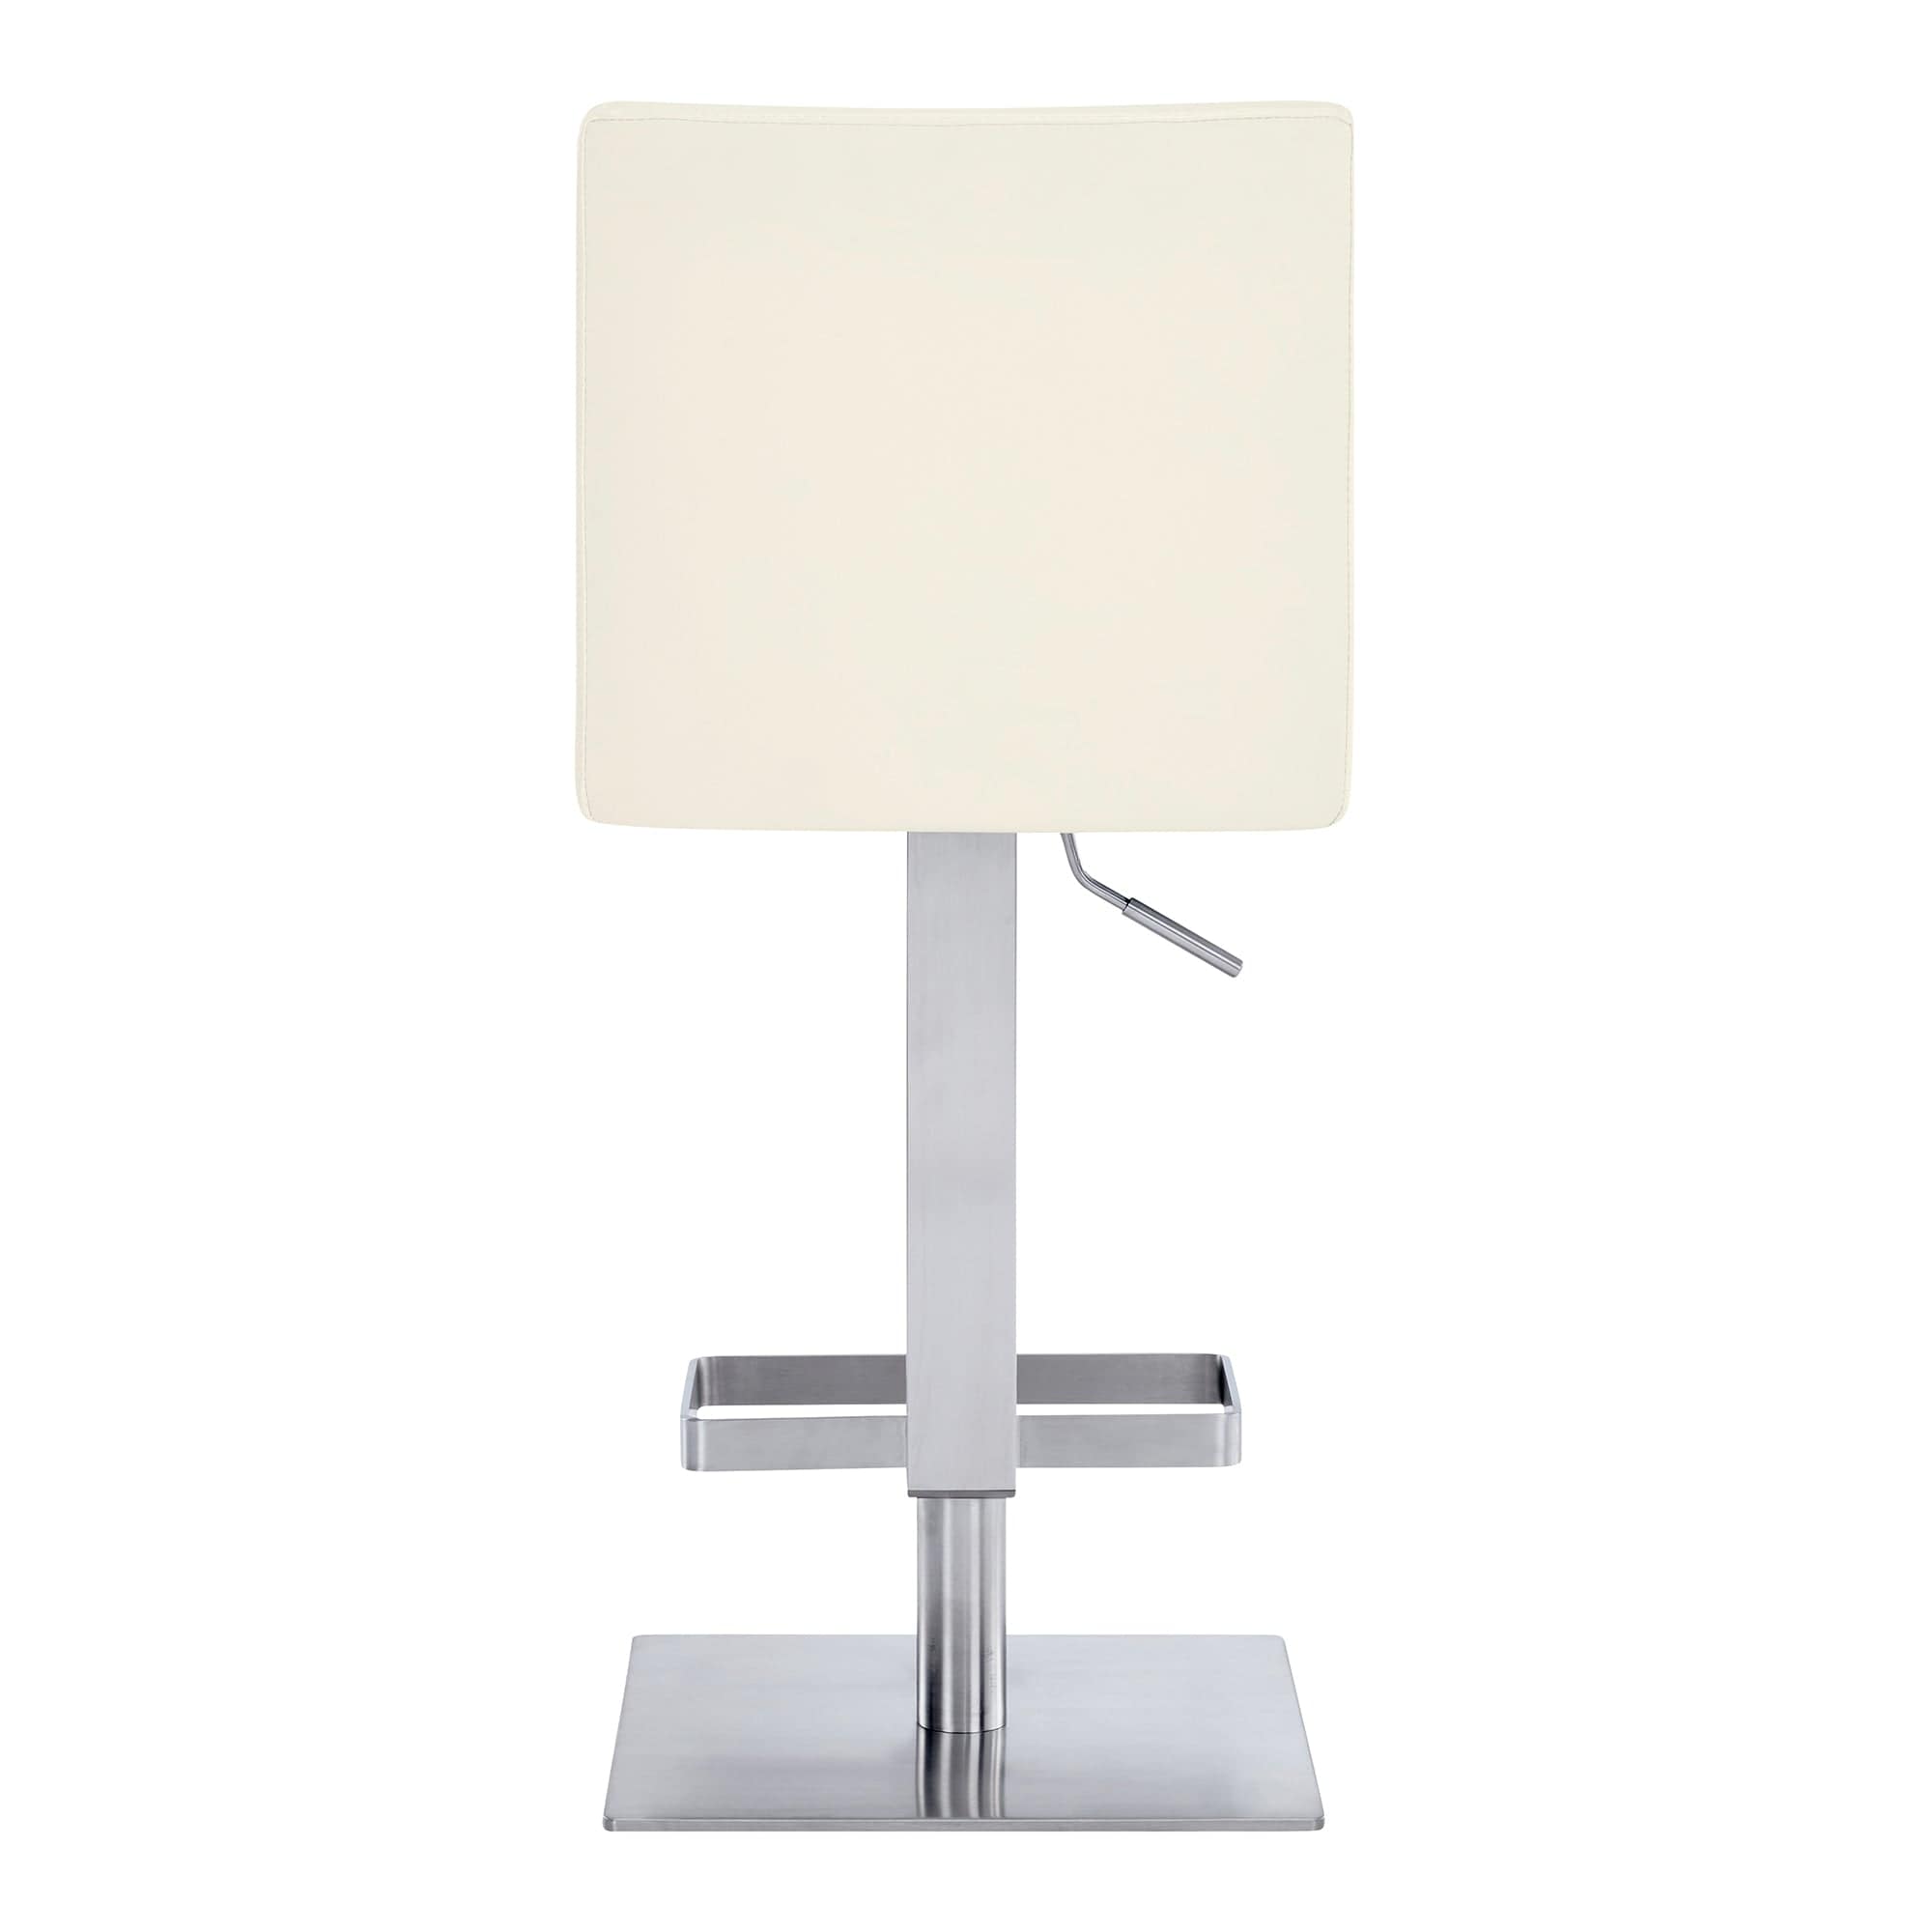 Armen Living Barstool White Faux Leather and Brushed Stainless Steel Bar Stool Armen Living - Legacy Adjustable Height Swivel White Faux Leather and Brushed Stainless Steel Bar Stool | LCLGSWBABSWH